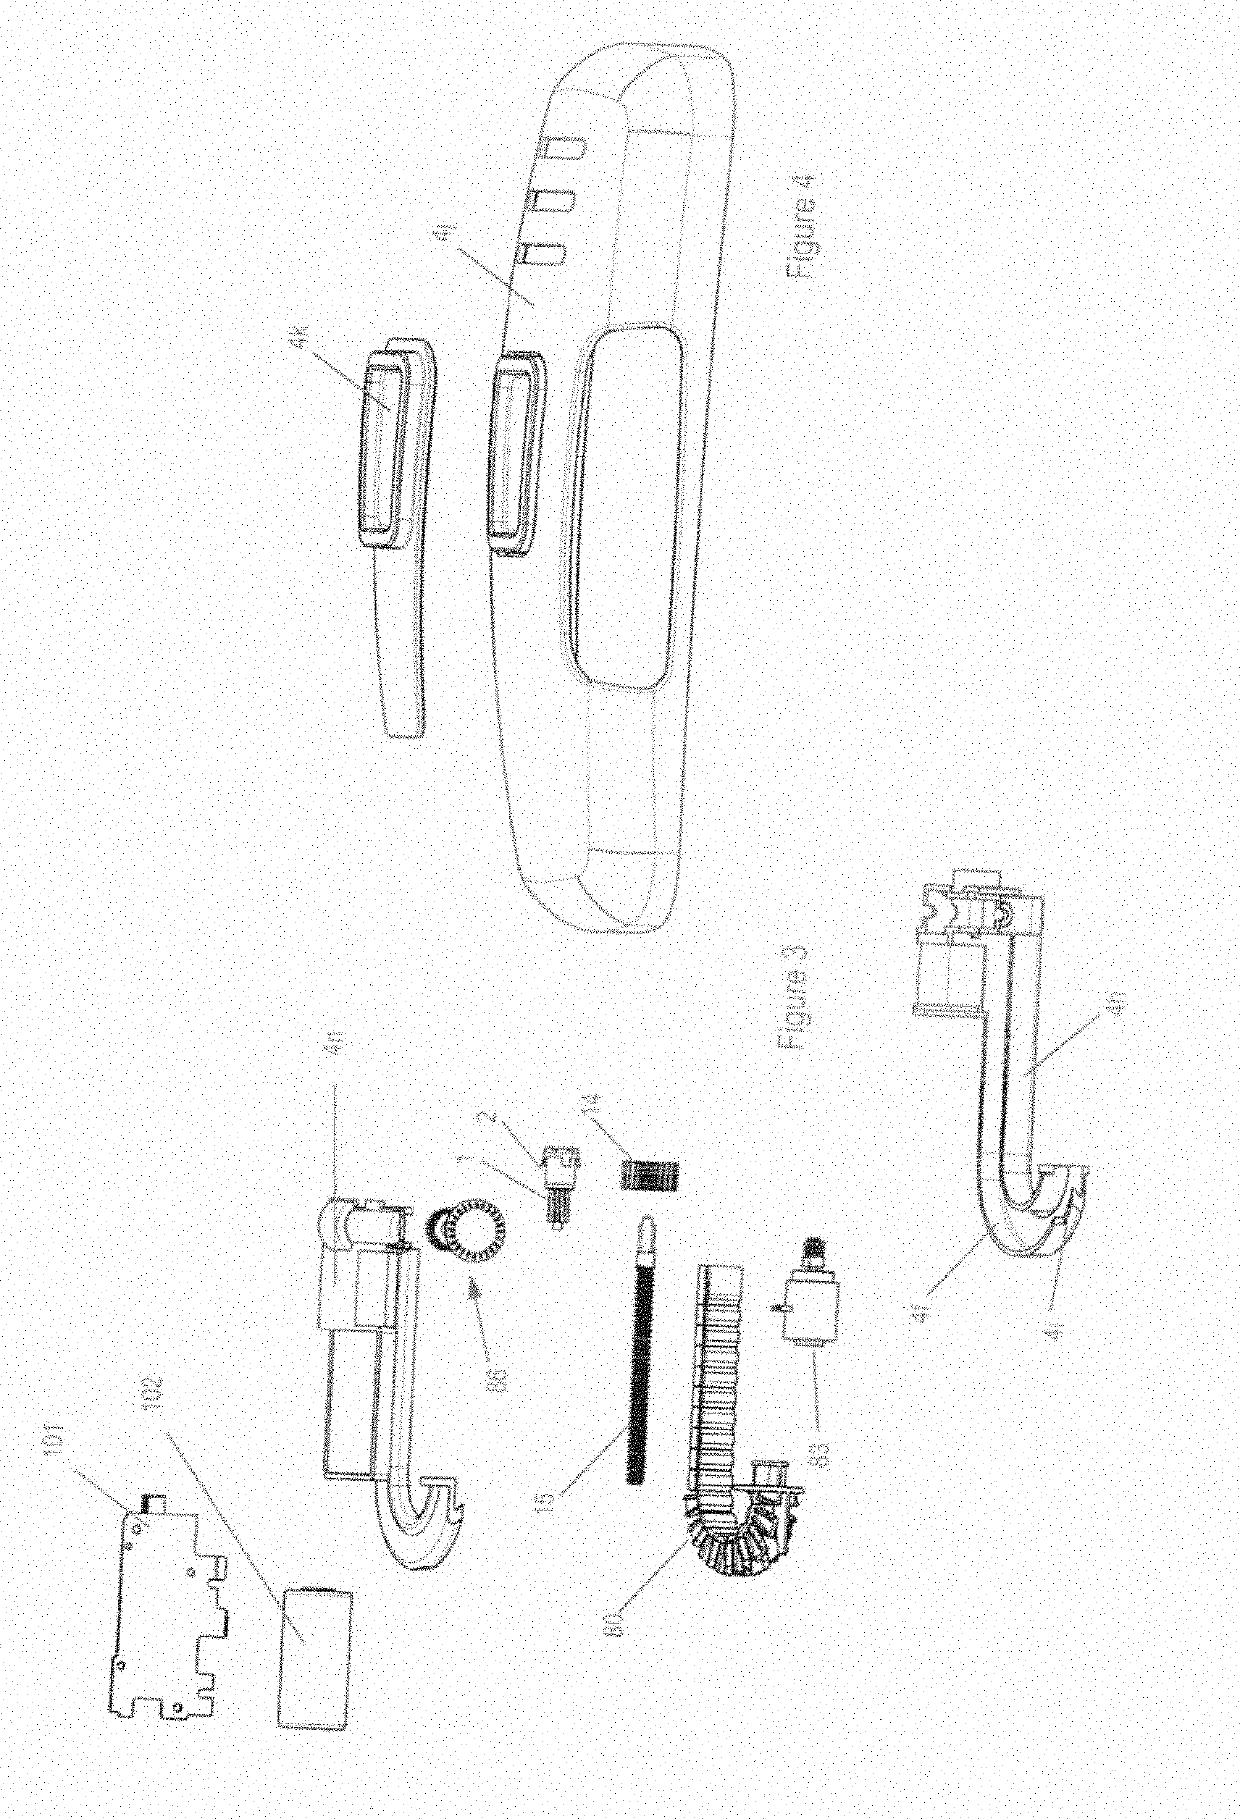 Segmented piston rod for a medication delivery device